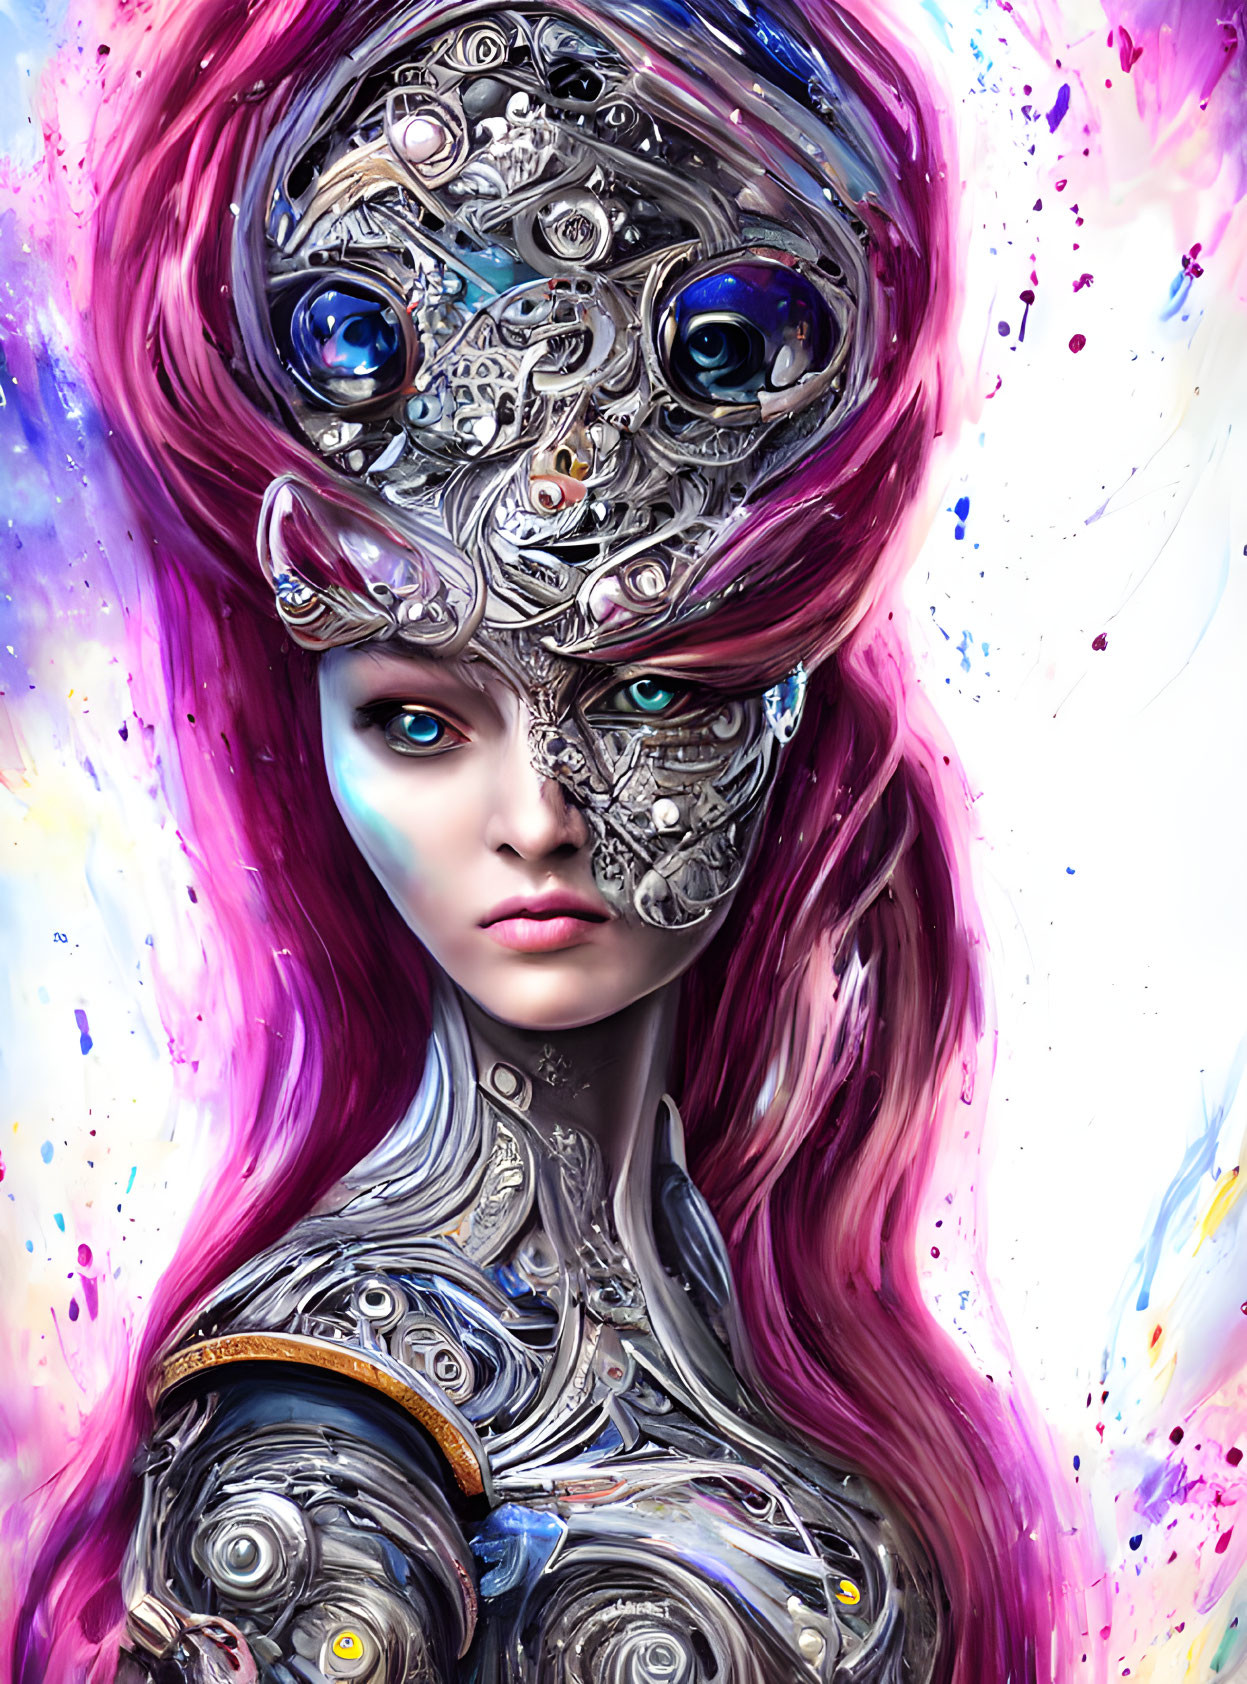 Female figure with pink hair, human and robotic eyes, and mechanical parts.